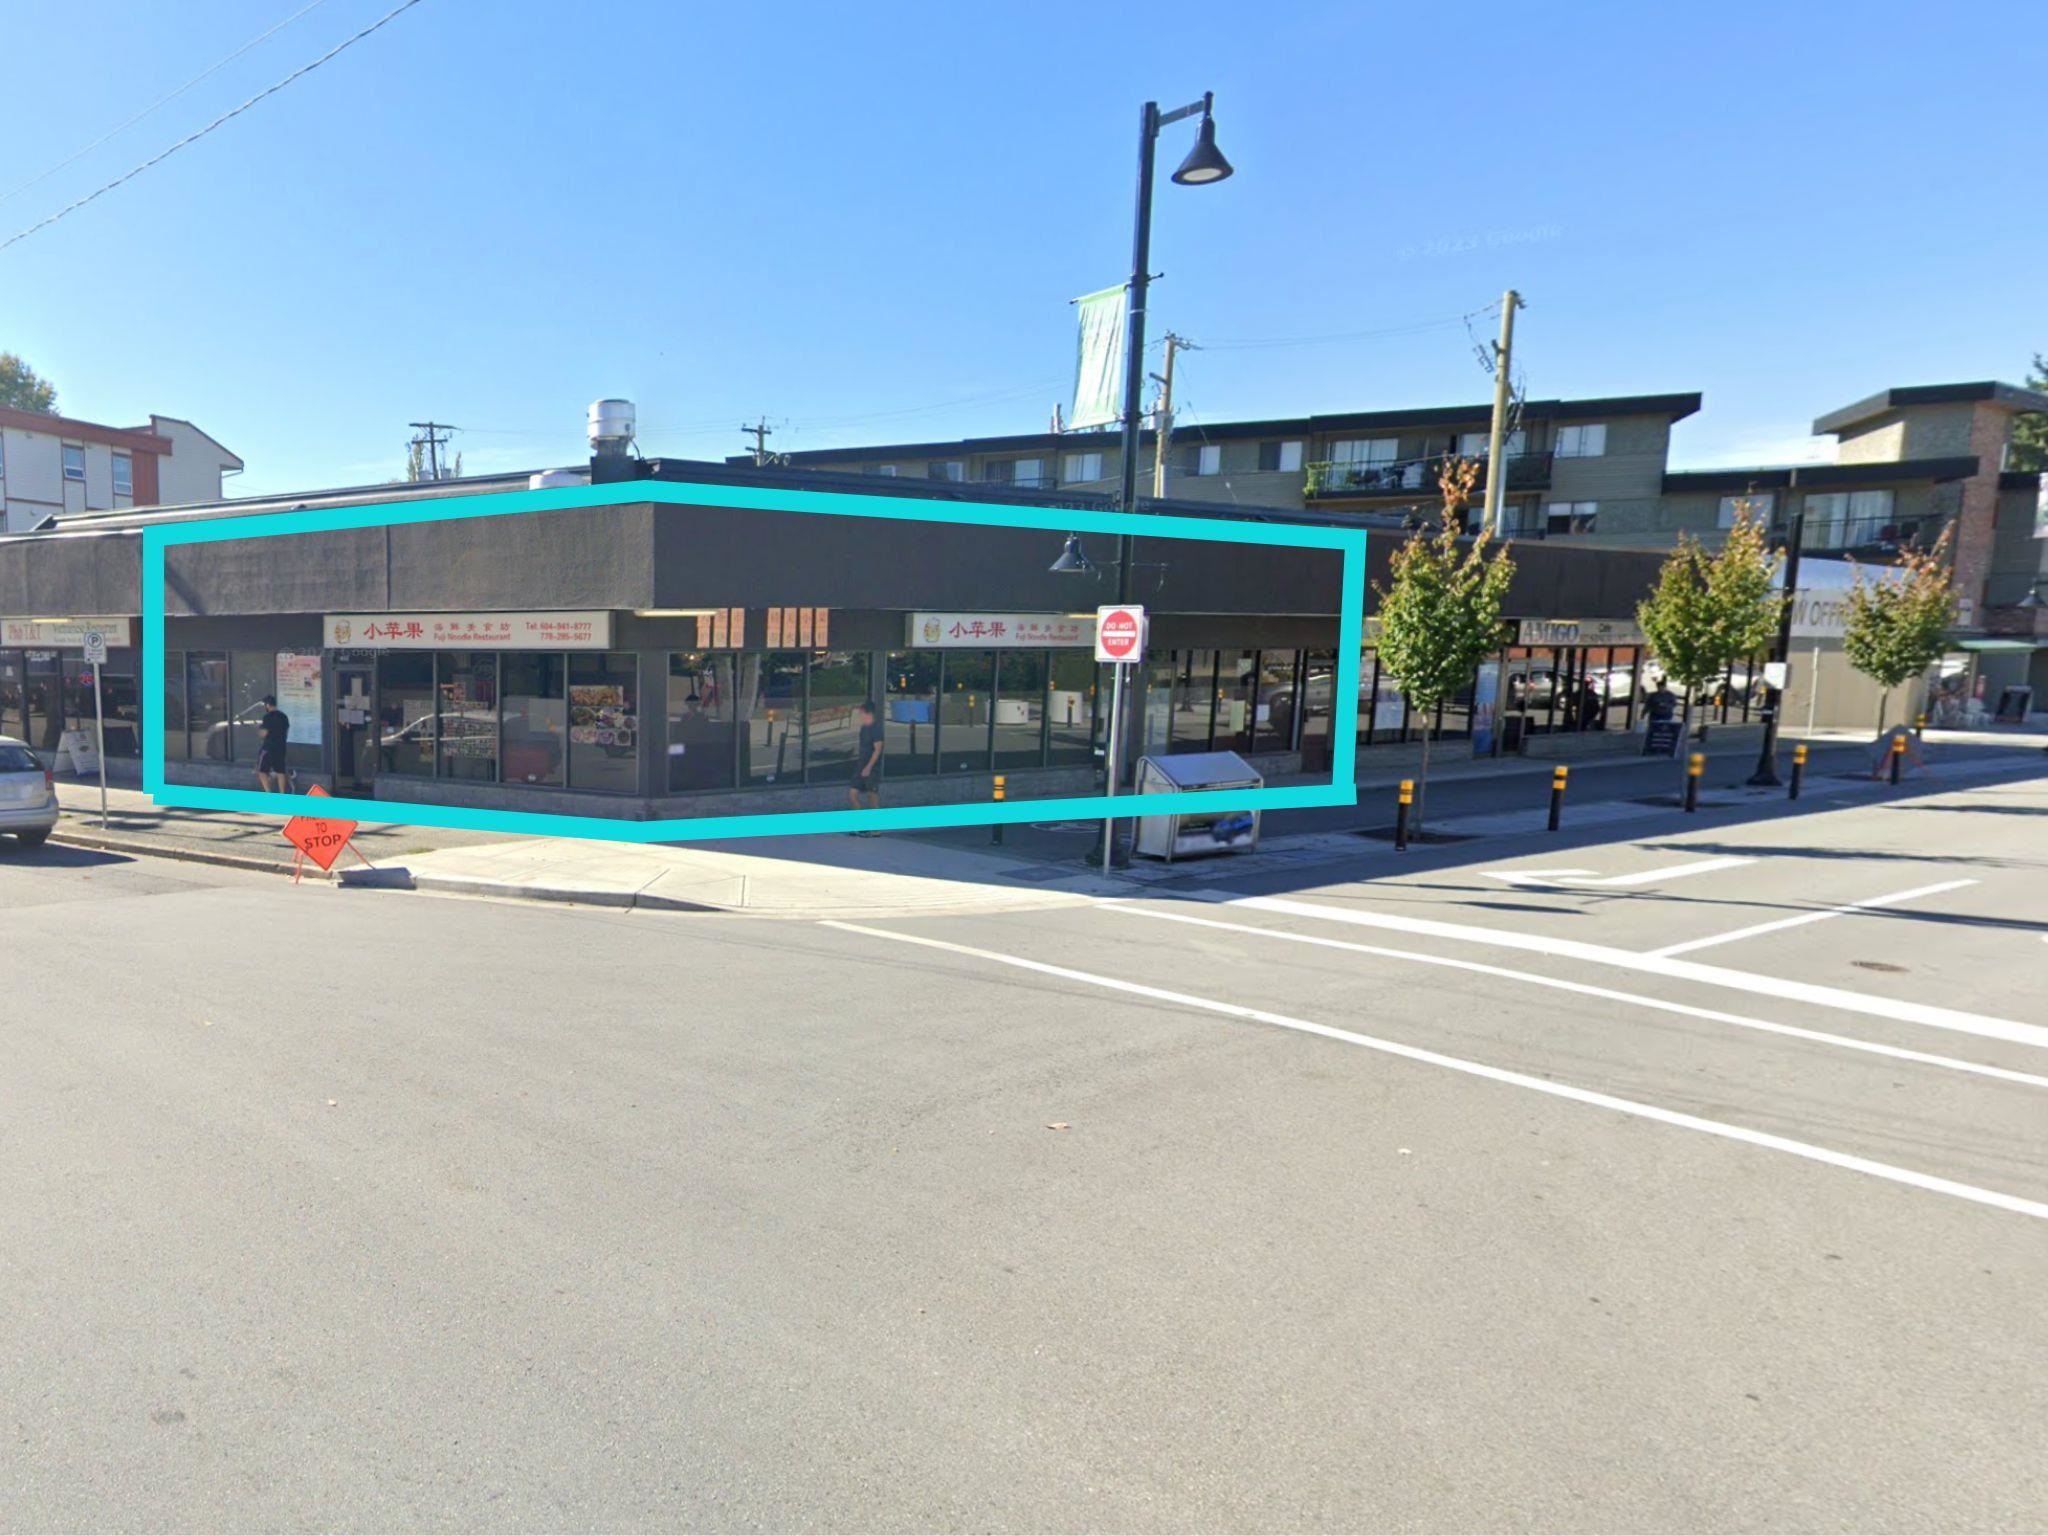 Central Pt Coquitlam Land Commercial for sale:    (Listed 6800-05-15)